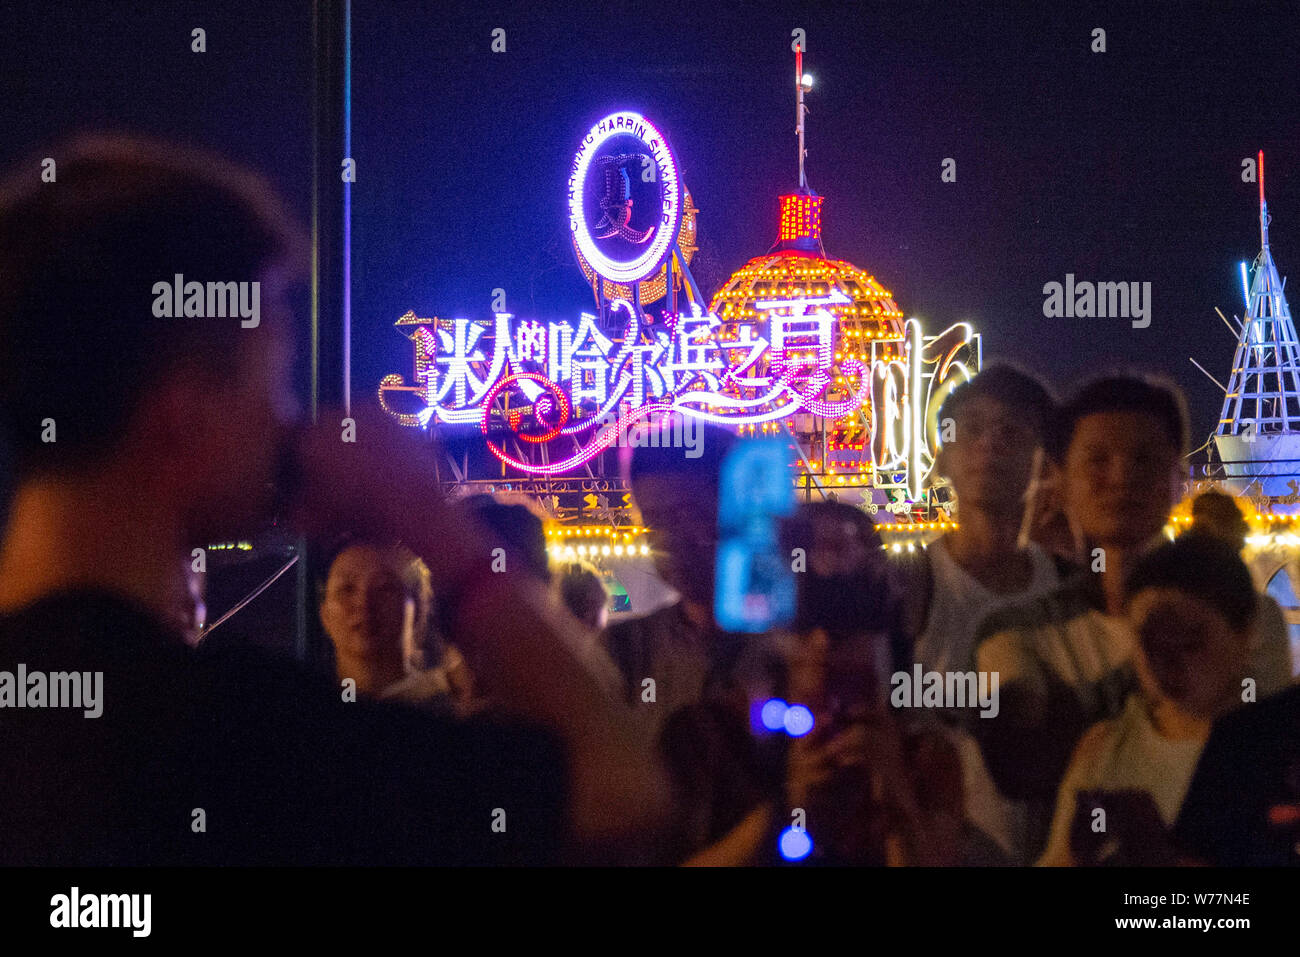 (190805) -- HARBIN, Aug. 5, 2019 (Xinhua) -- People sing along Songhua River in Harbin, capital of northeast China's Heilongjiang Province, July 31, 2019. Attracted by the coolness in summer, many tourists come to Harbin for vacation. Meanwhile, Harbin is a city of music for the locals who got in touch with European classical music in an earlier time in China. With the cool summer and rich culture, Harbin received 36.23 million tourists and made revenue of 60.7 billion yuan (8.6 billion U.S. dollars) in the summer of 2018. (Xinhua/Xie Jianfei) Stock Photo